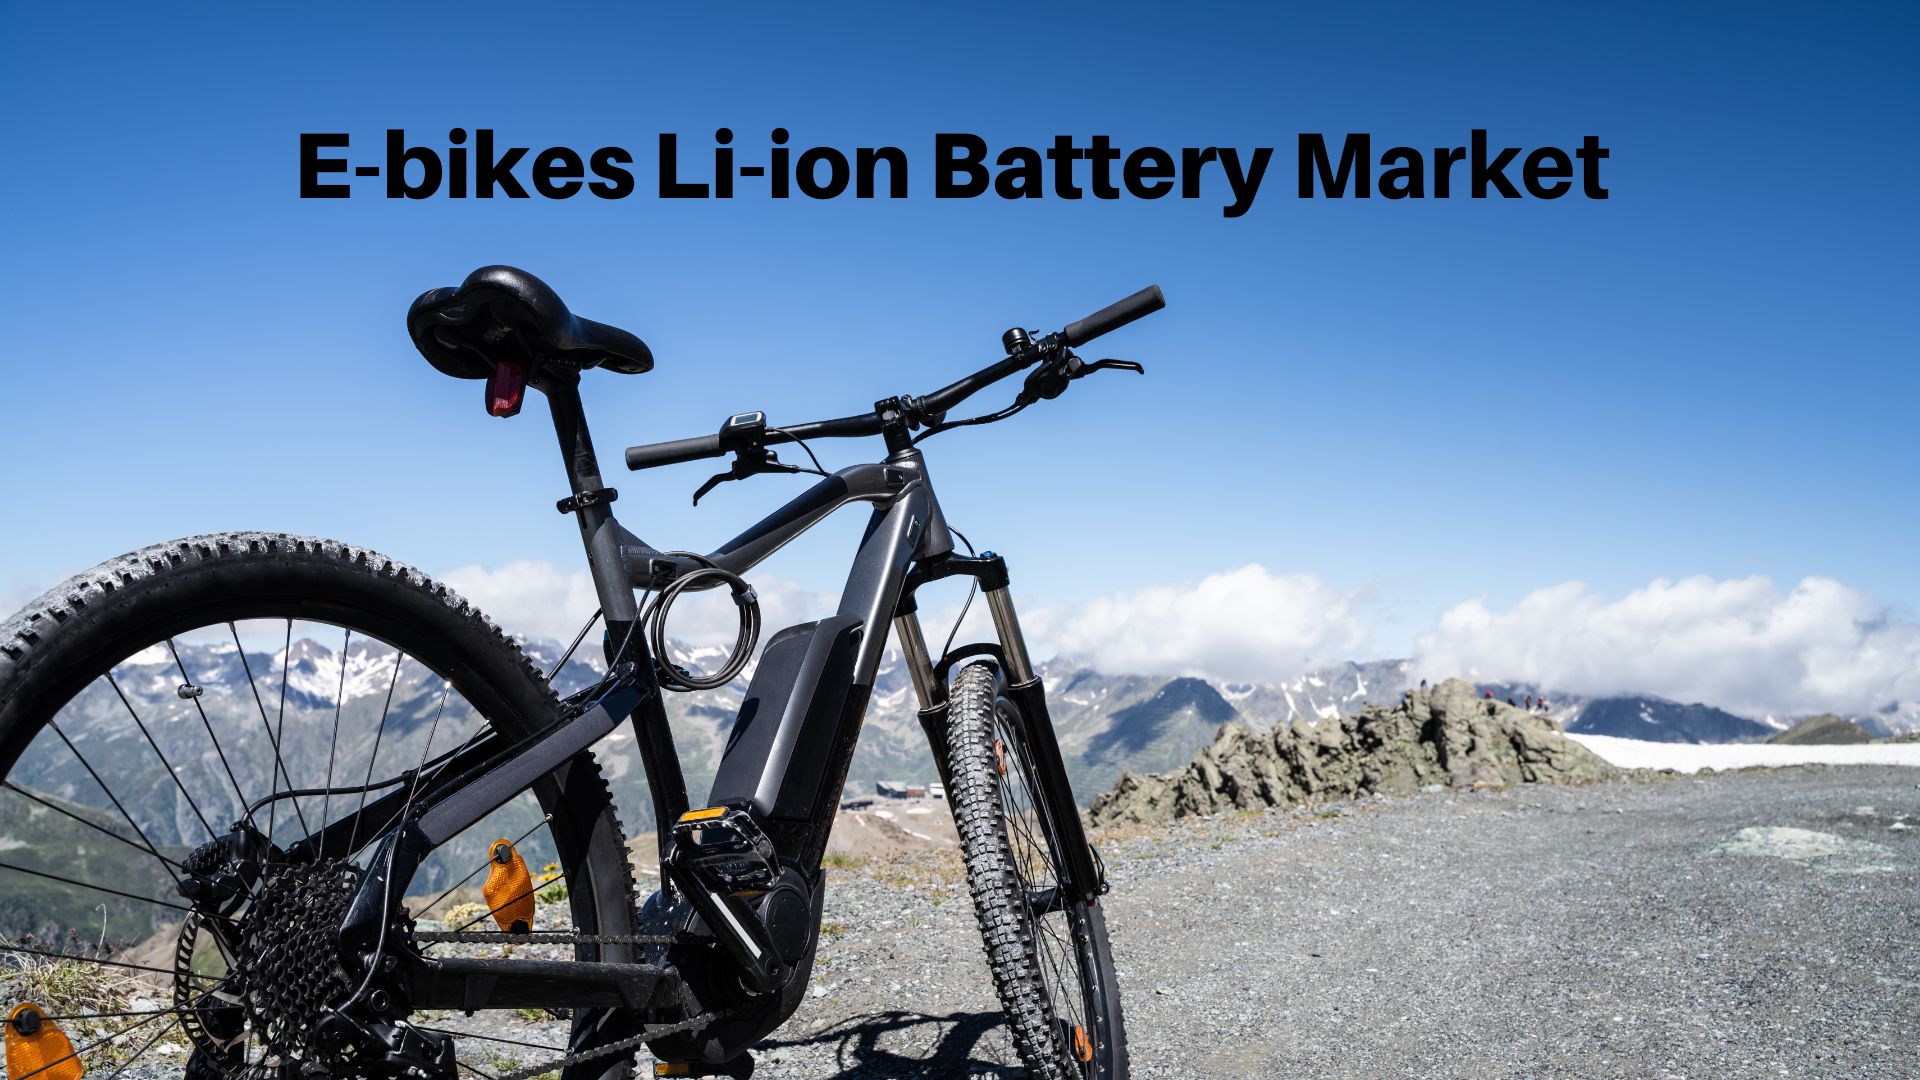 E-bikes Li-ion Battery Market Vendors Analysis | Growth Rate 14.7 By 2032